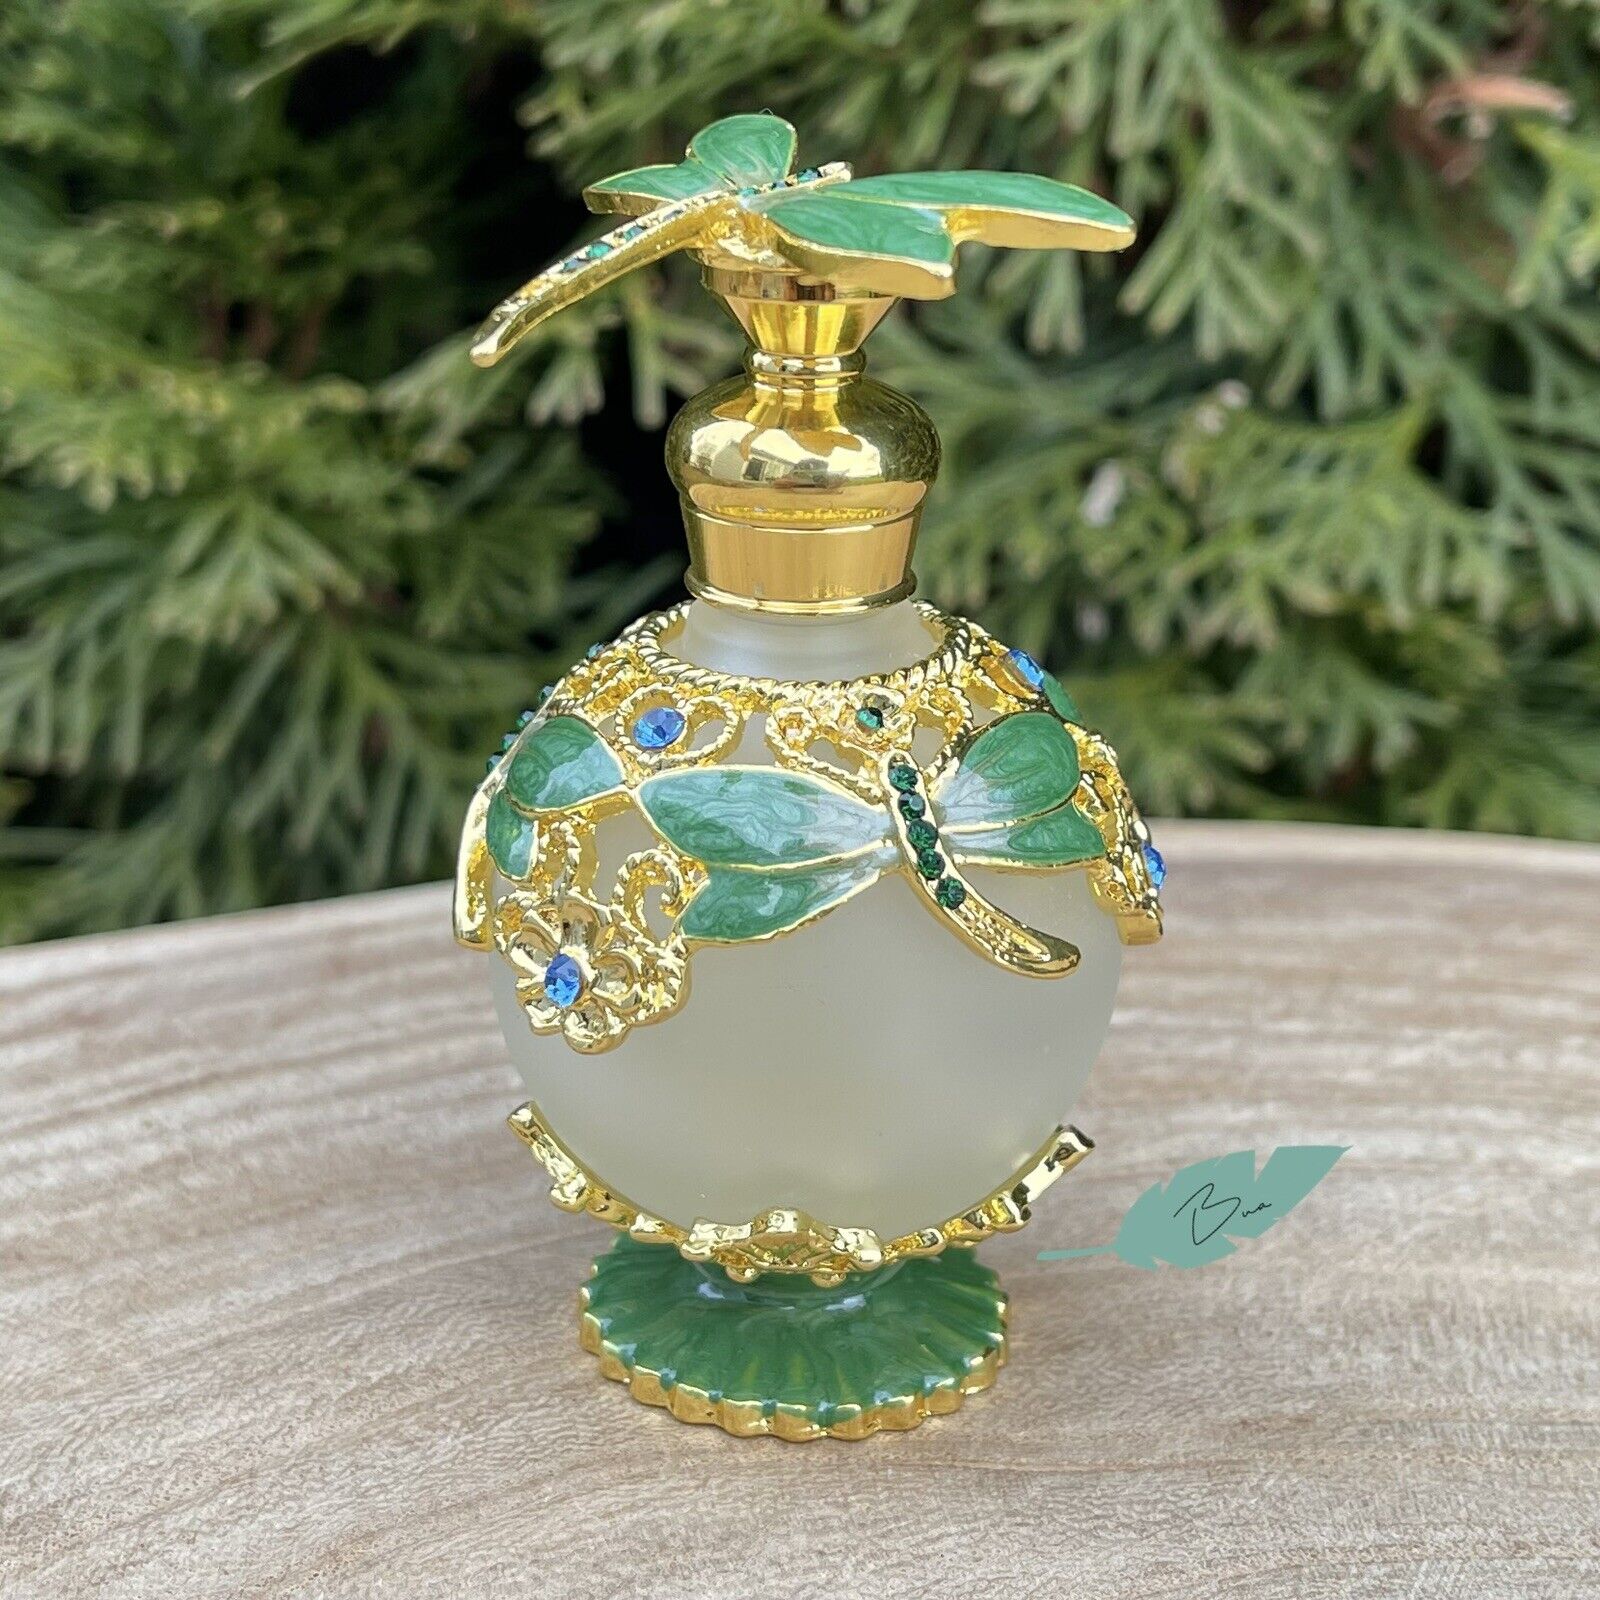 Dragonfly Vintage-Style Perfume Bottle 25mL In Emerald Green